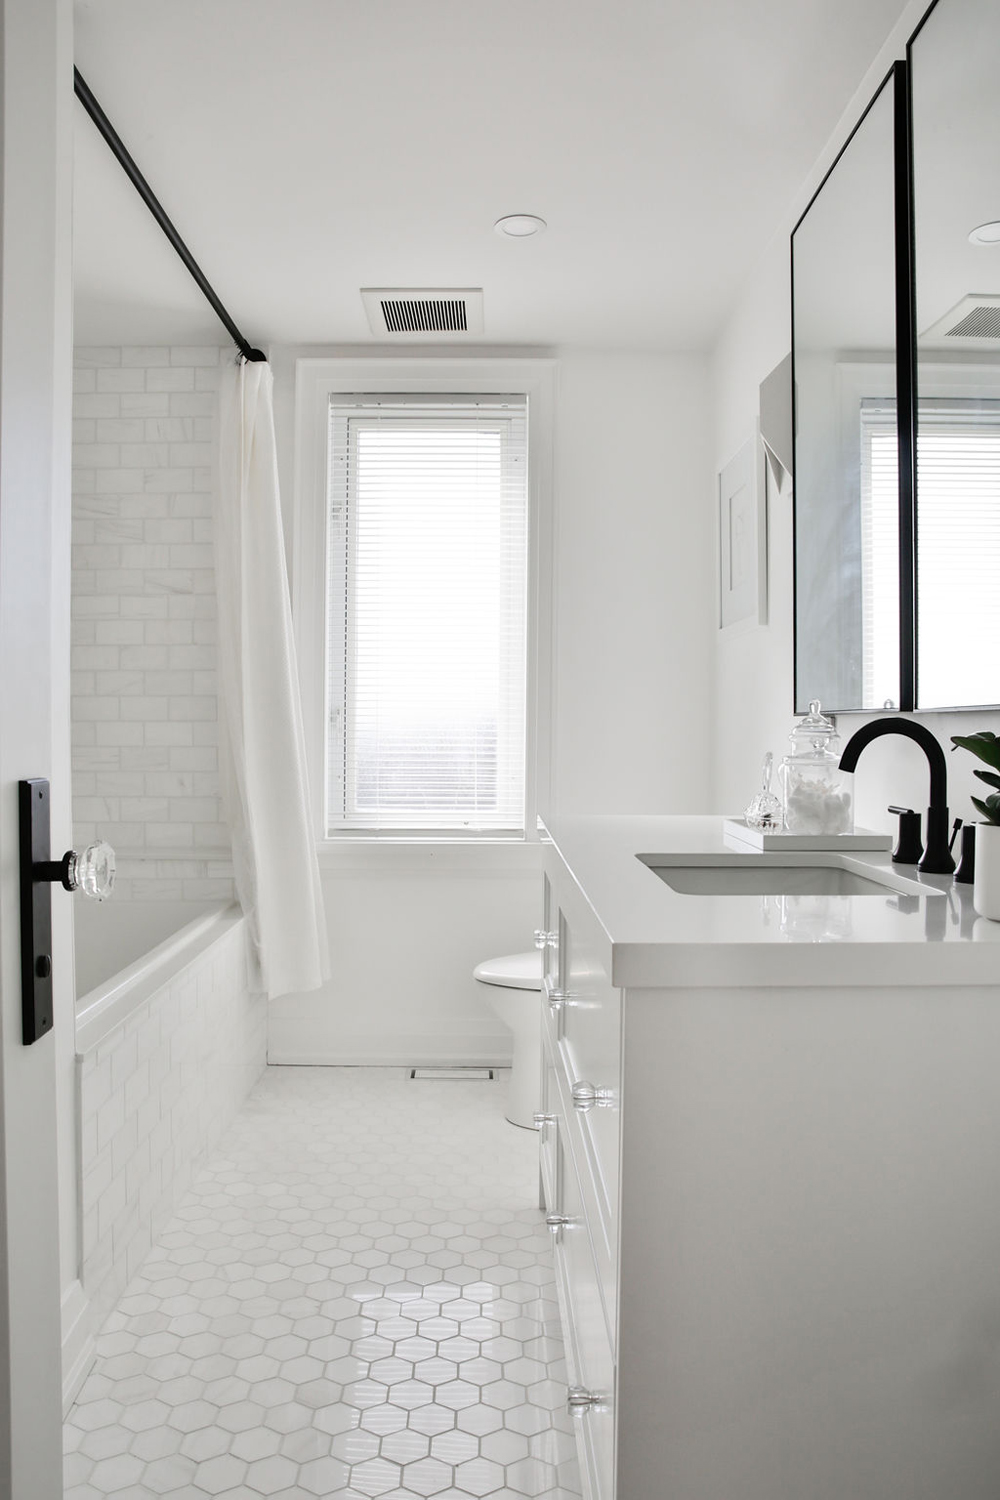 Pristine white bathroom with plenty of natural light and black faucet hardware